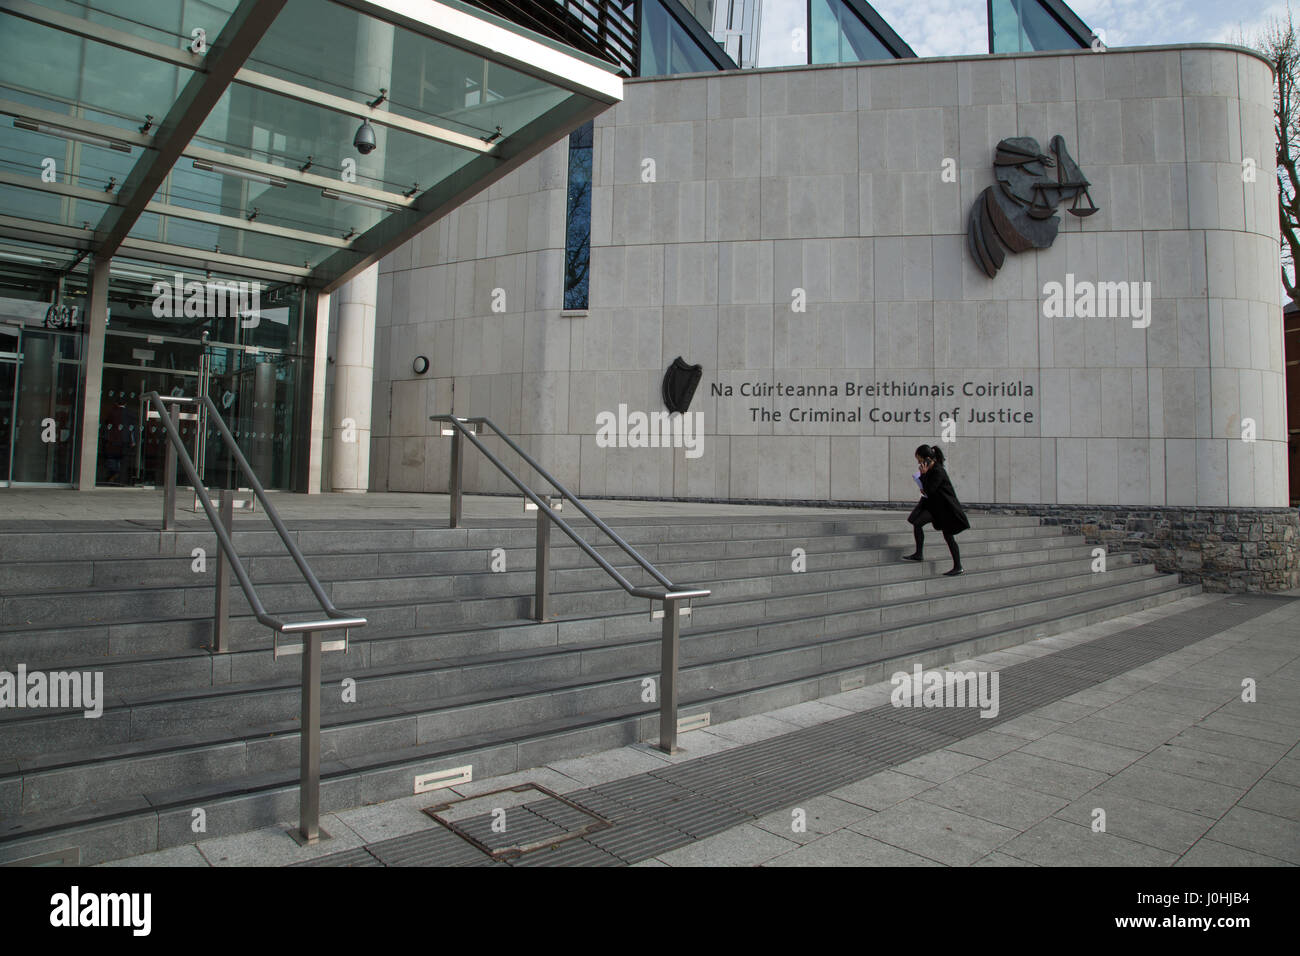 Criminal Courts of Justice, Dublin city, Ireland. Stock Photo